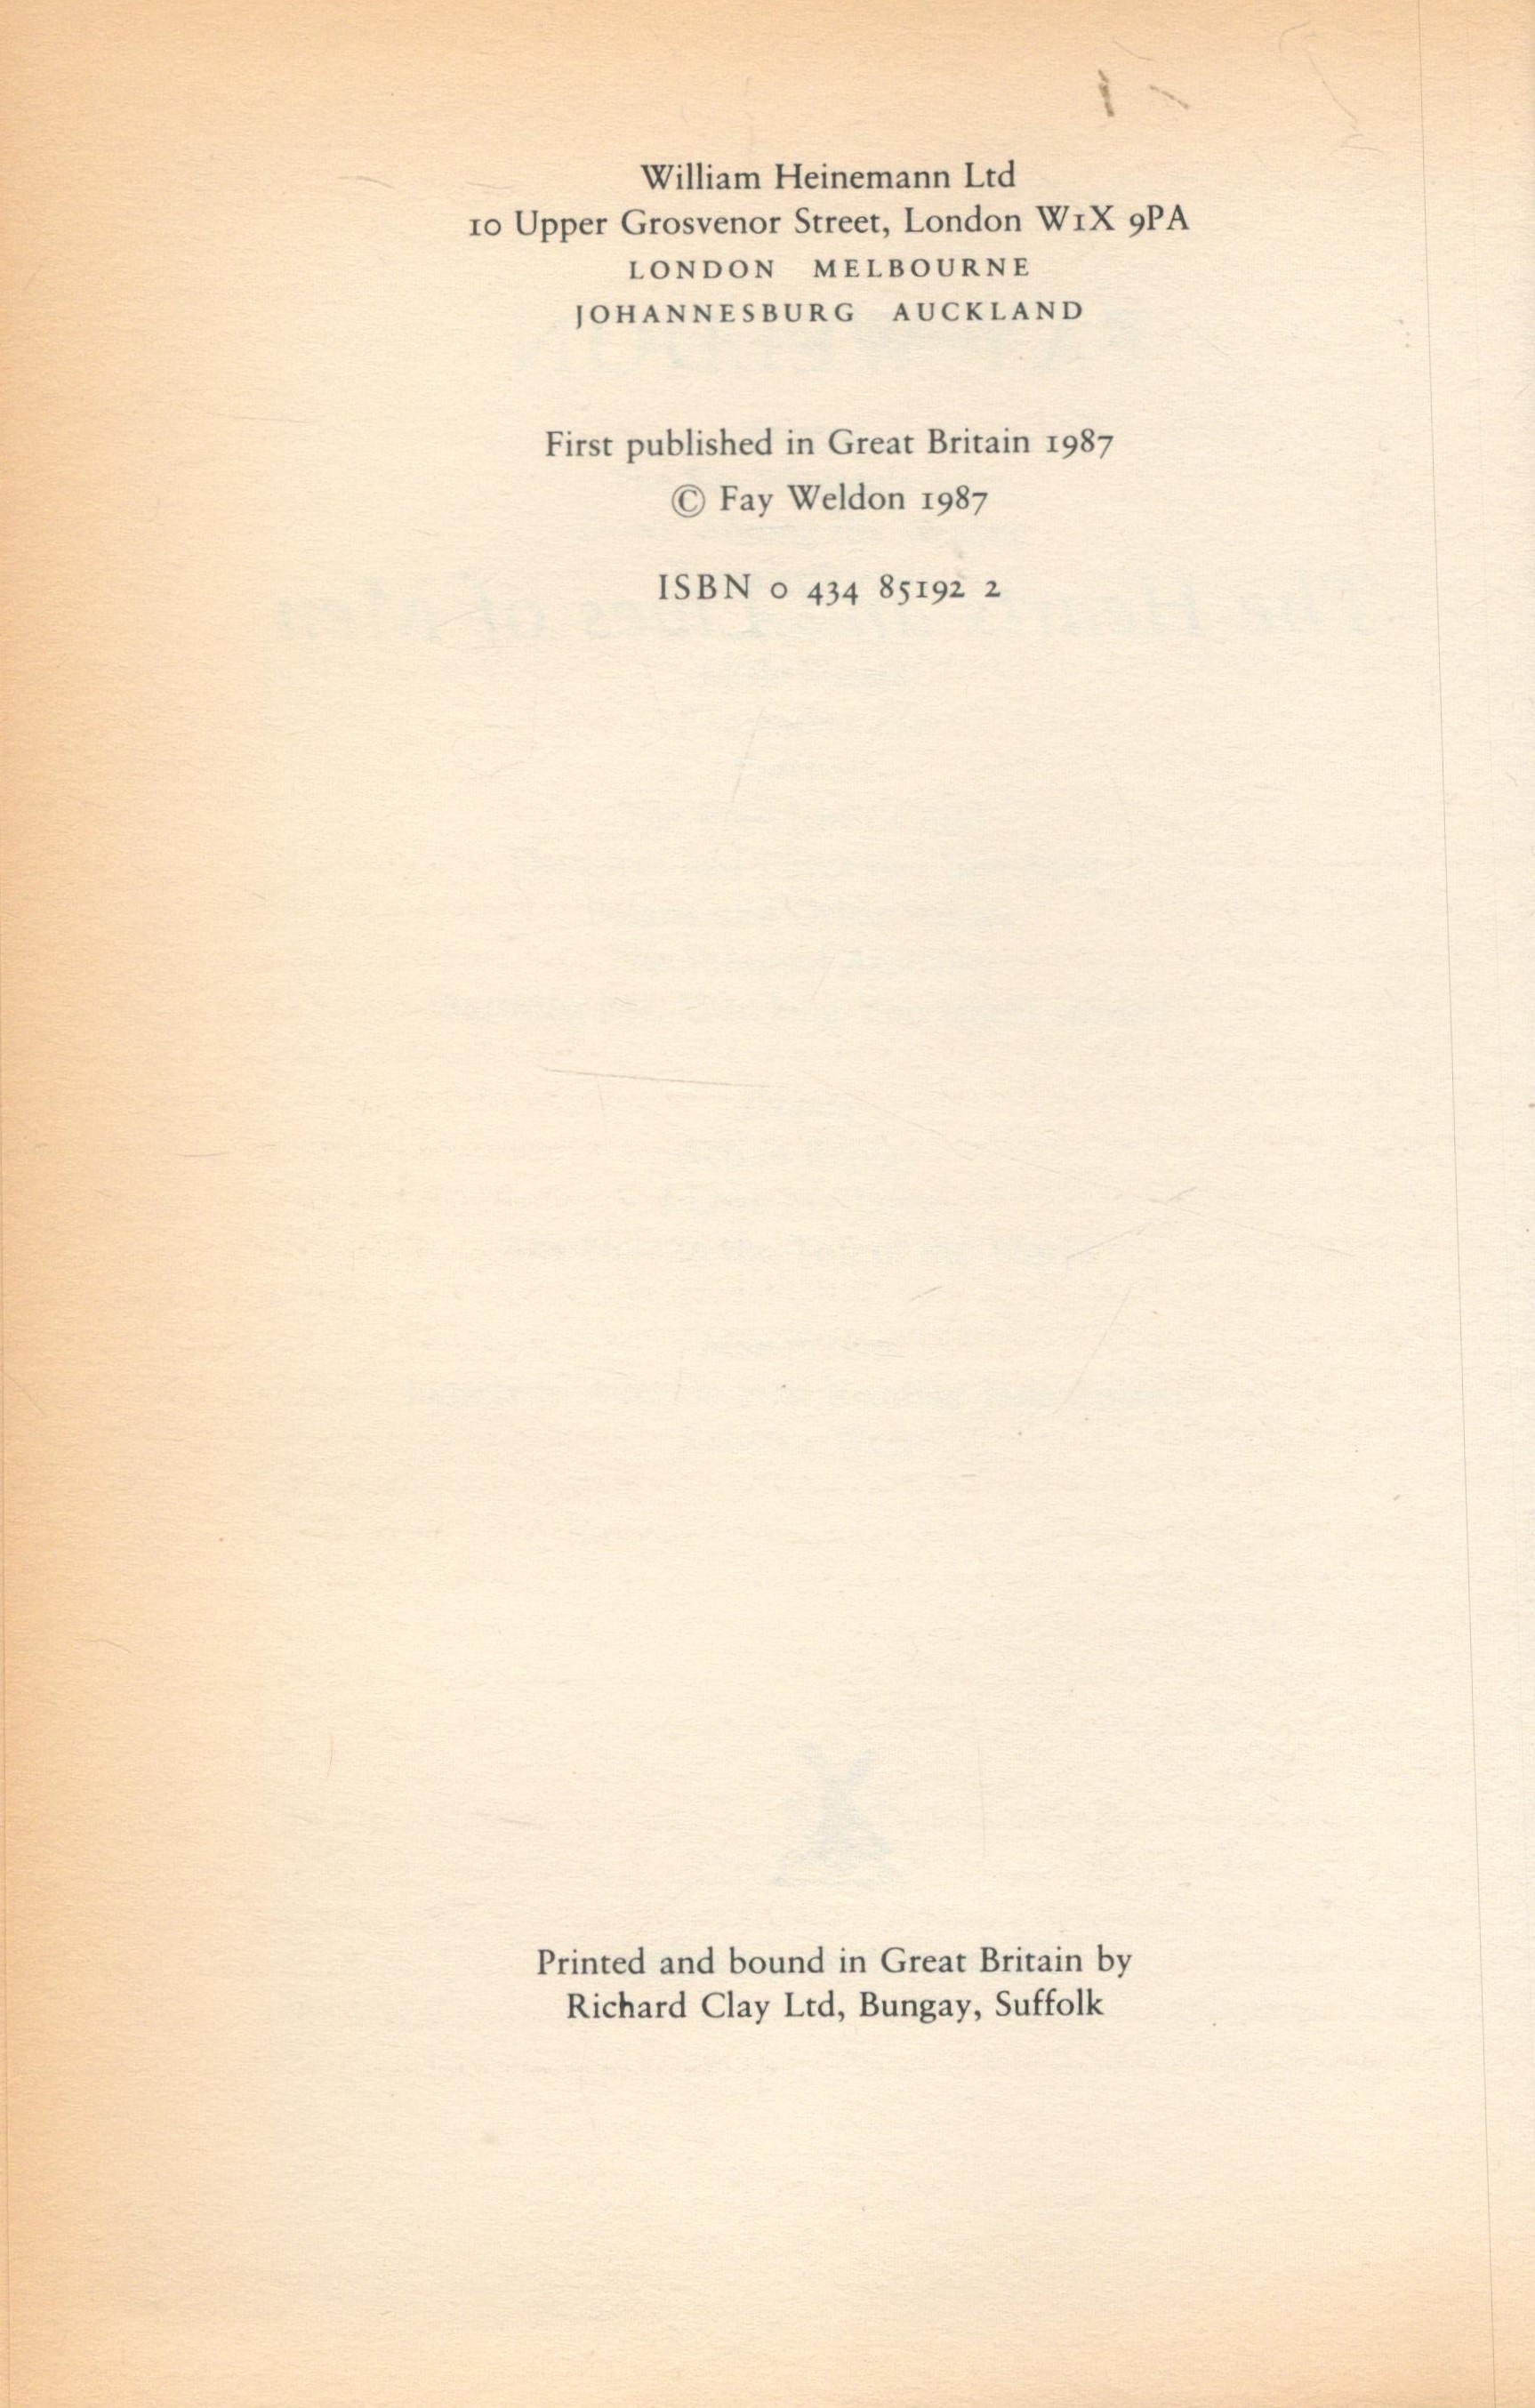 The Hearts and Lives of Men by Fay Weldon 1987 First Edition Hardback Book with 328 pages - Image 3 of 3